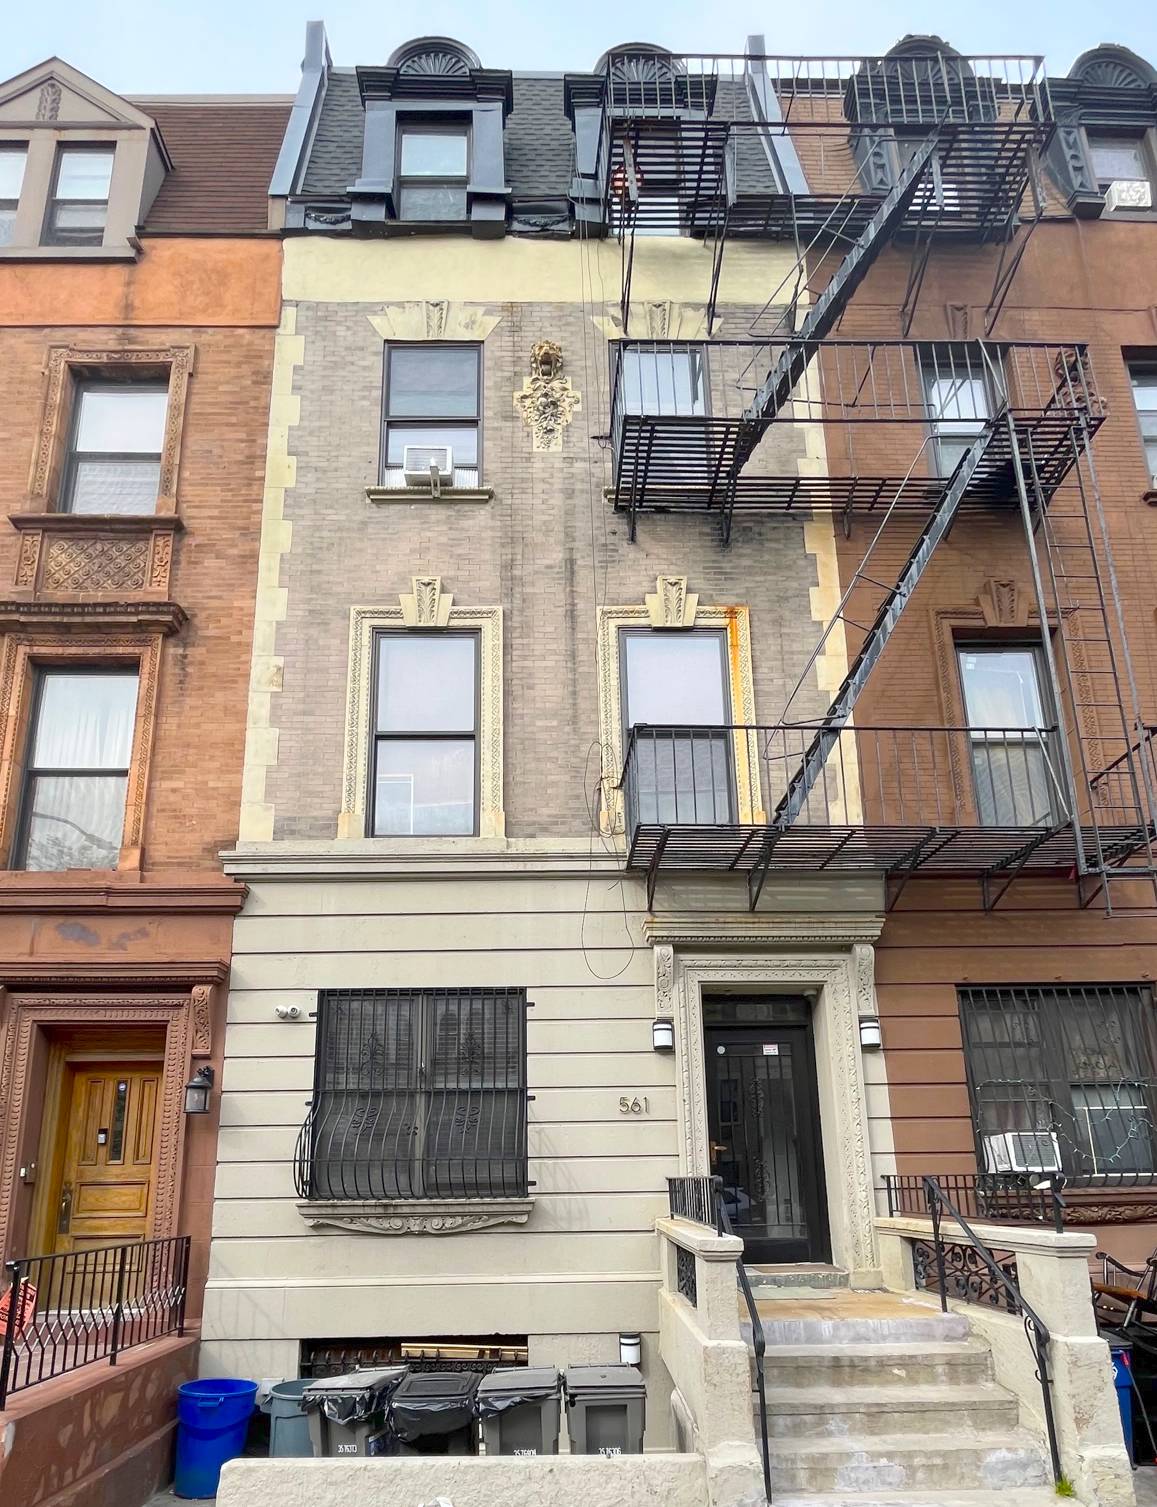 Nestled in the vibrant neighborhood of Washington Heights, 561 West 161st is an Art Deco style, 8 Unit multi family building that can be delivered fully occupied with a healthy ...